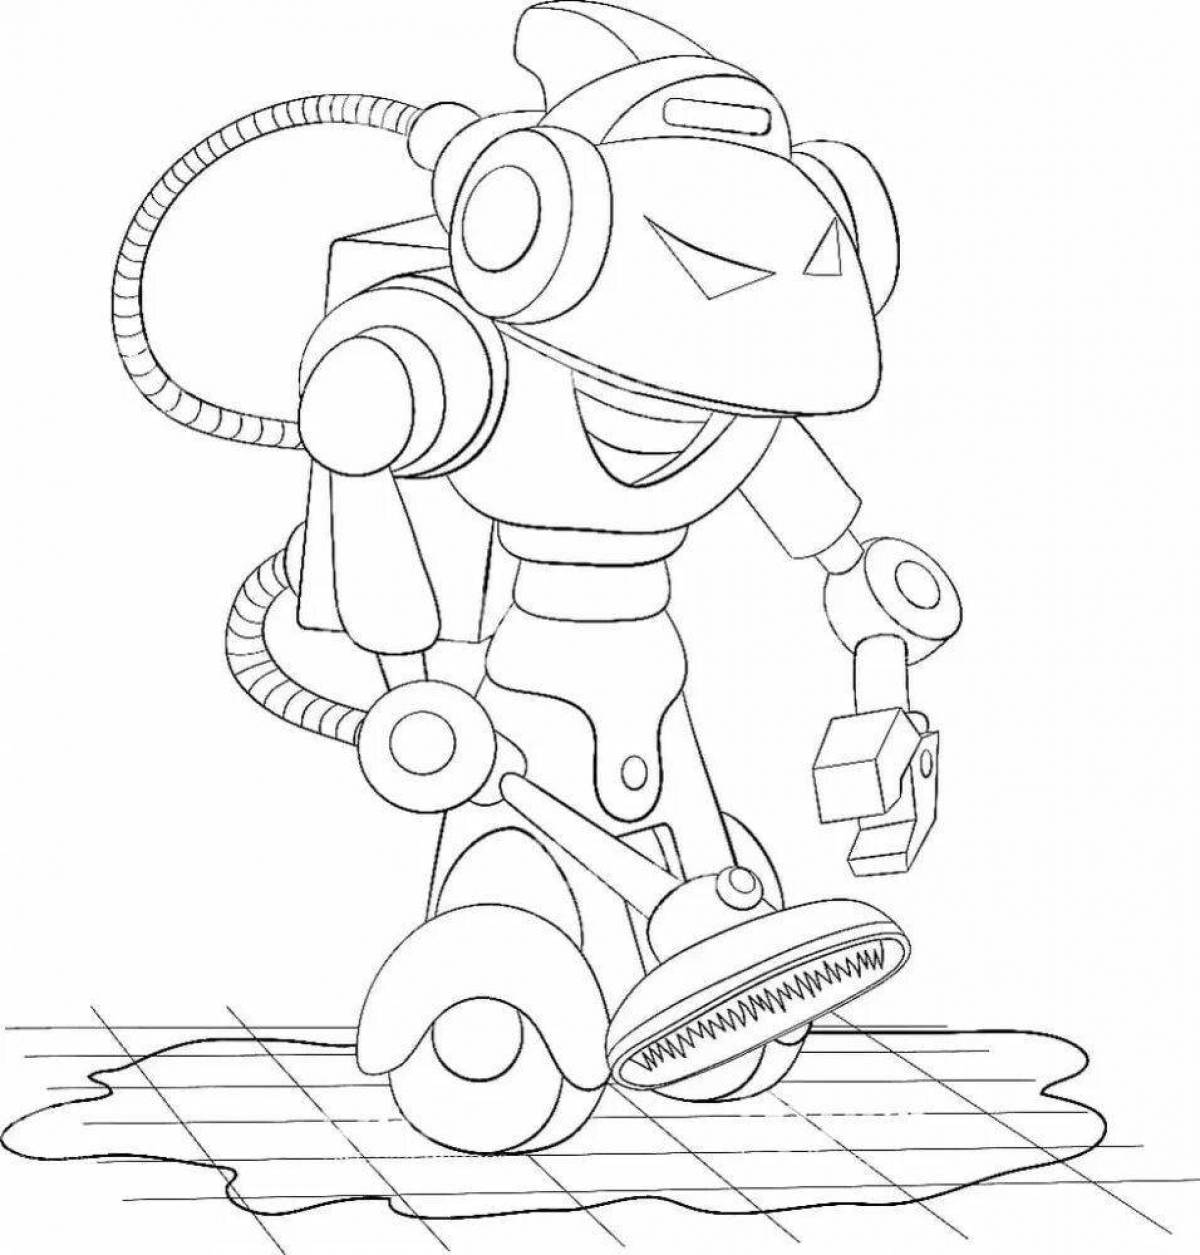 Intriguing Robot Vacuum Cleaner Coloring Book for Boys